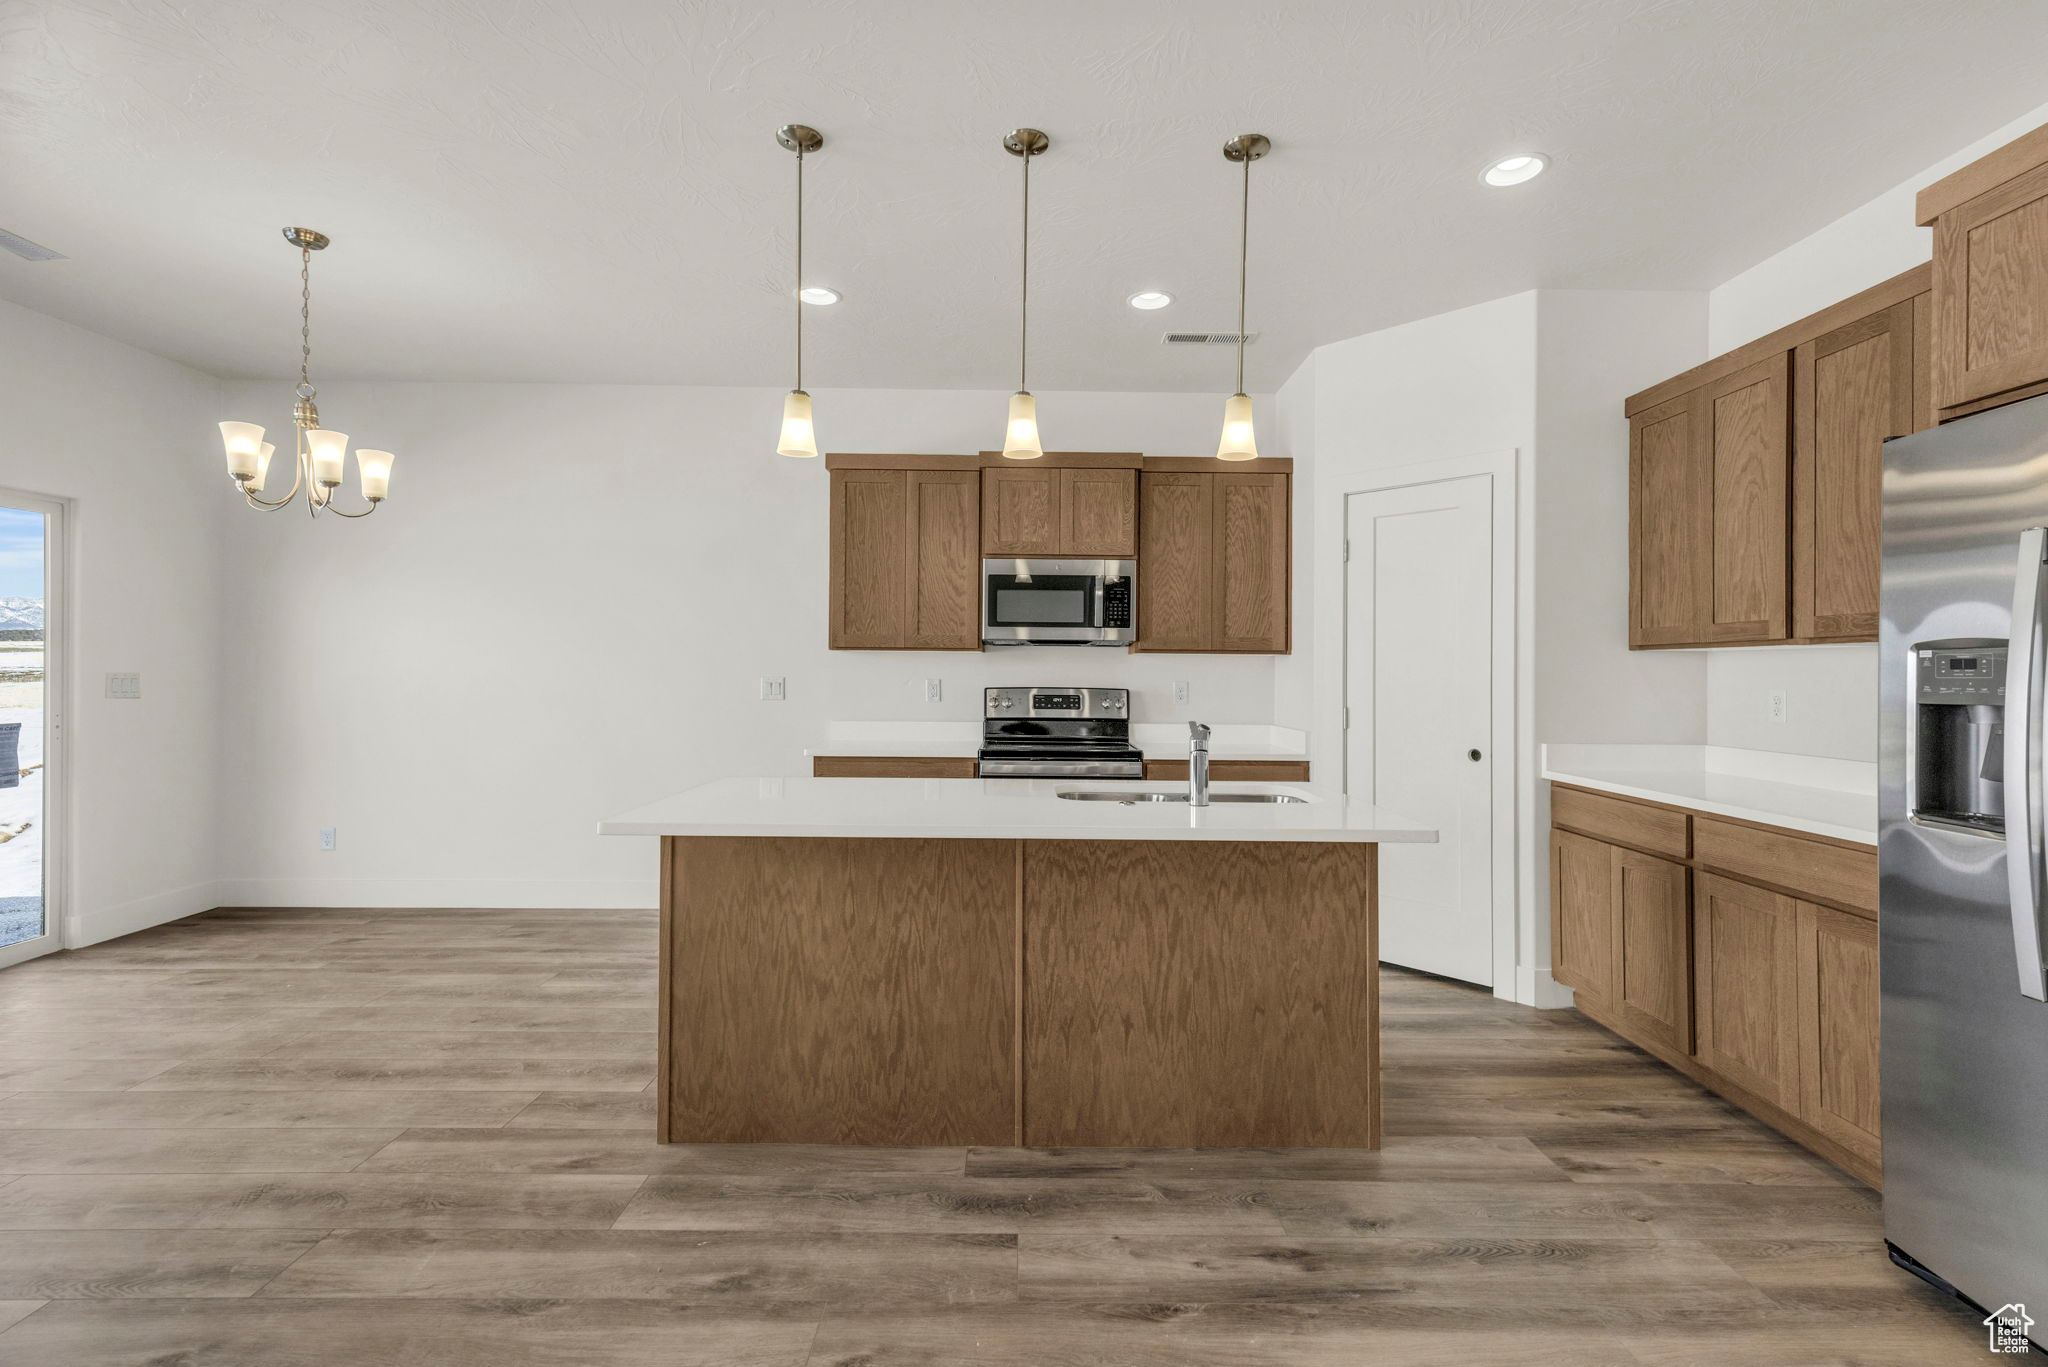 Kitchen with light wood-type flooring, stainless steel appliances, a chandelier, hanging light fixtures, and a kitchen island with sink